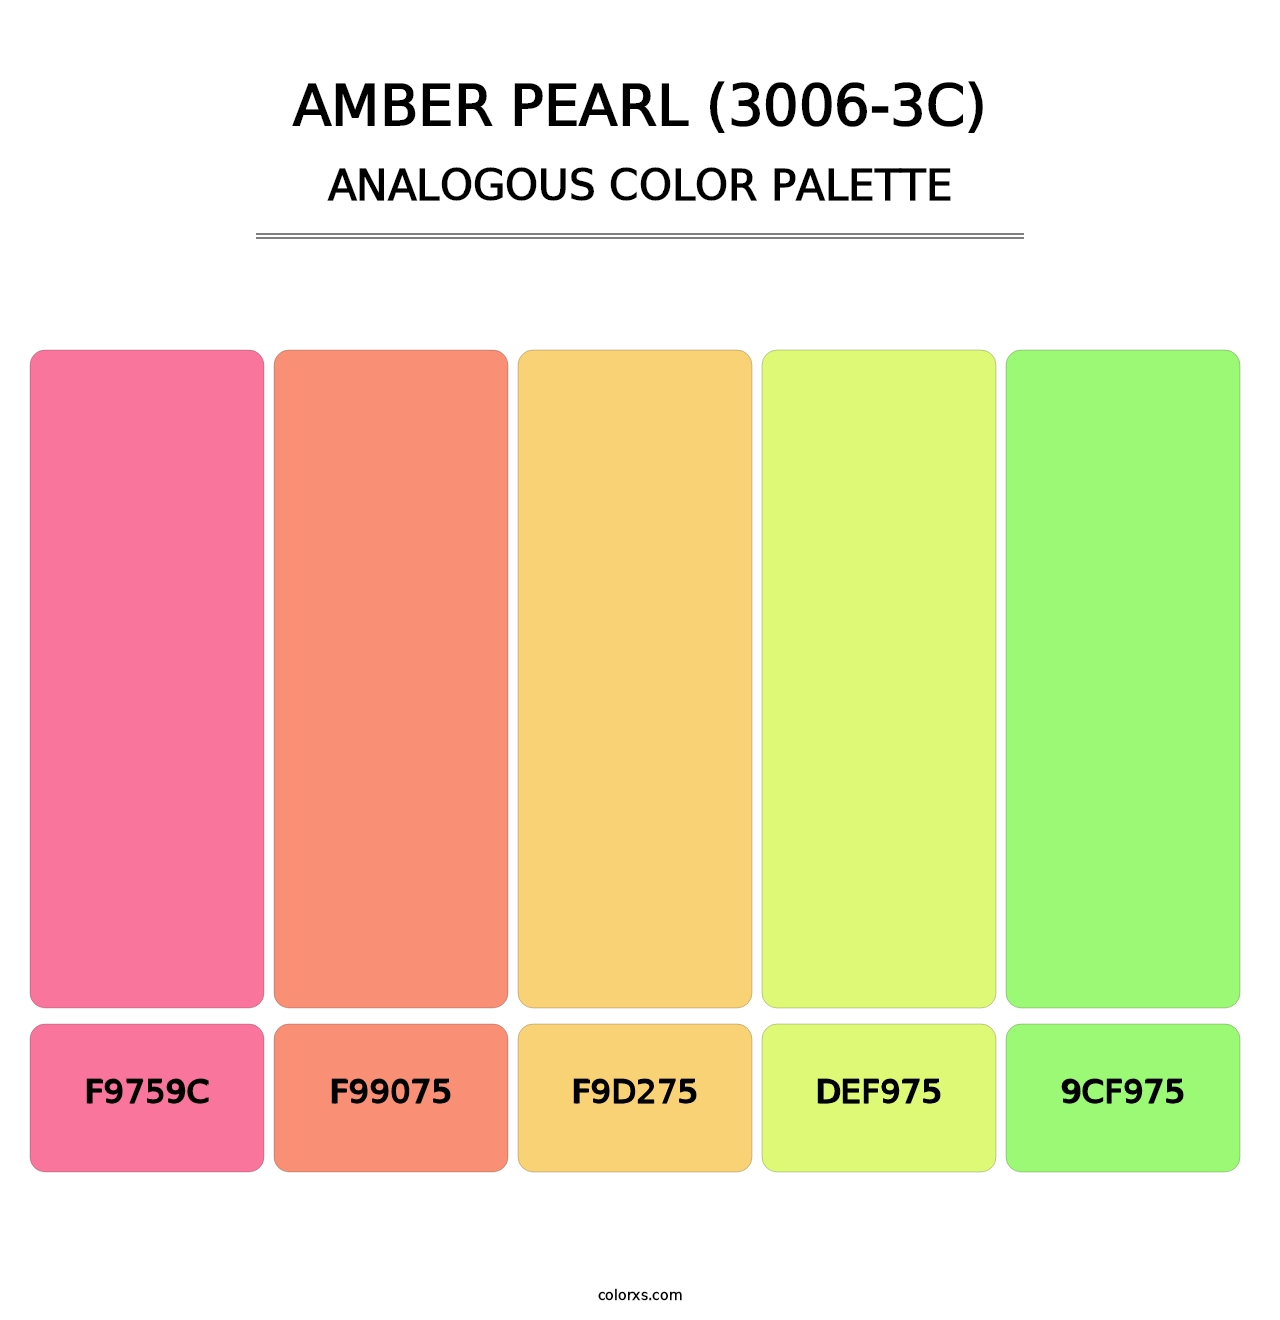 Amber Pearl (3006-3C) - Analogous Color Palette